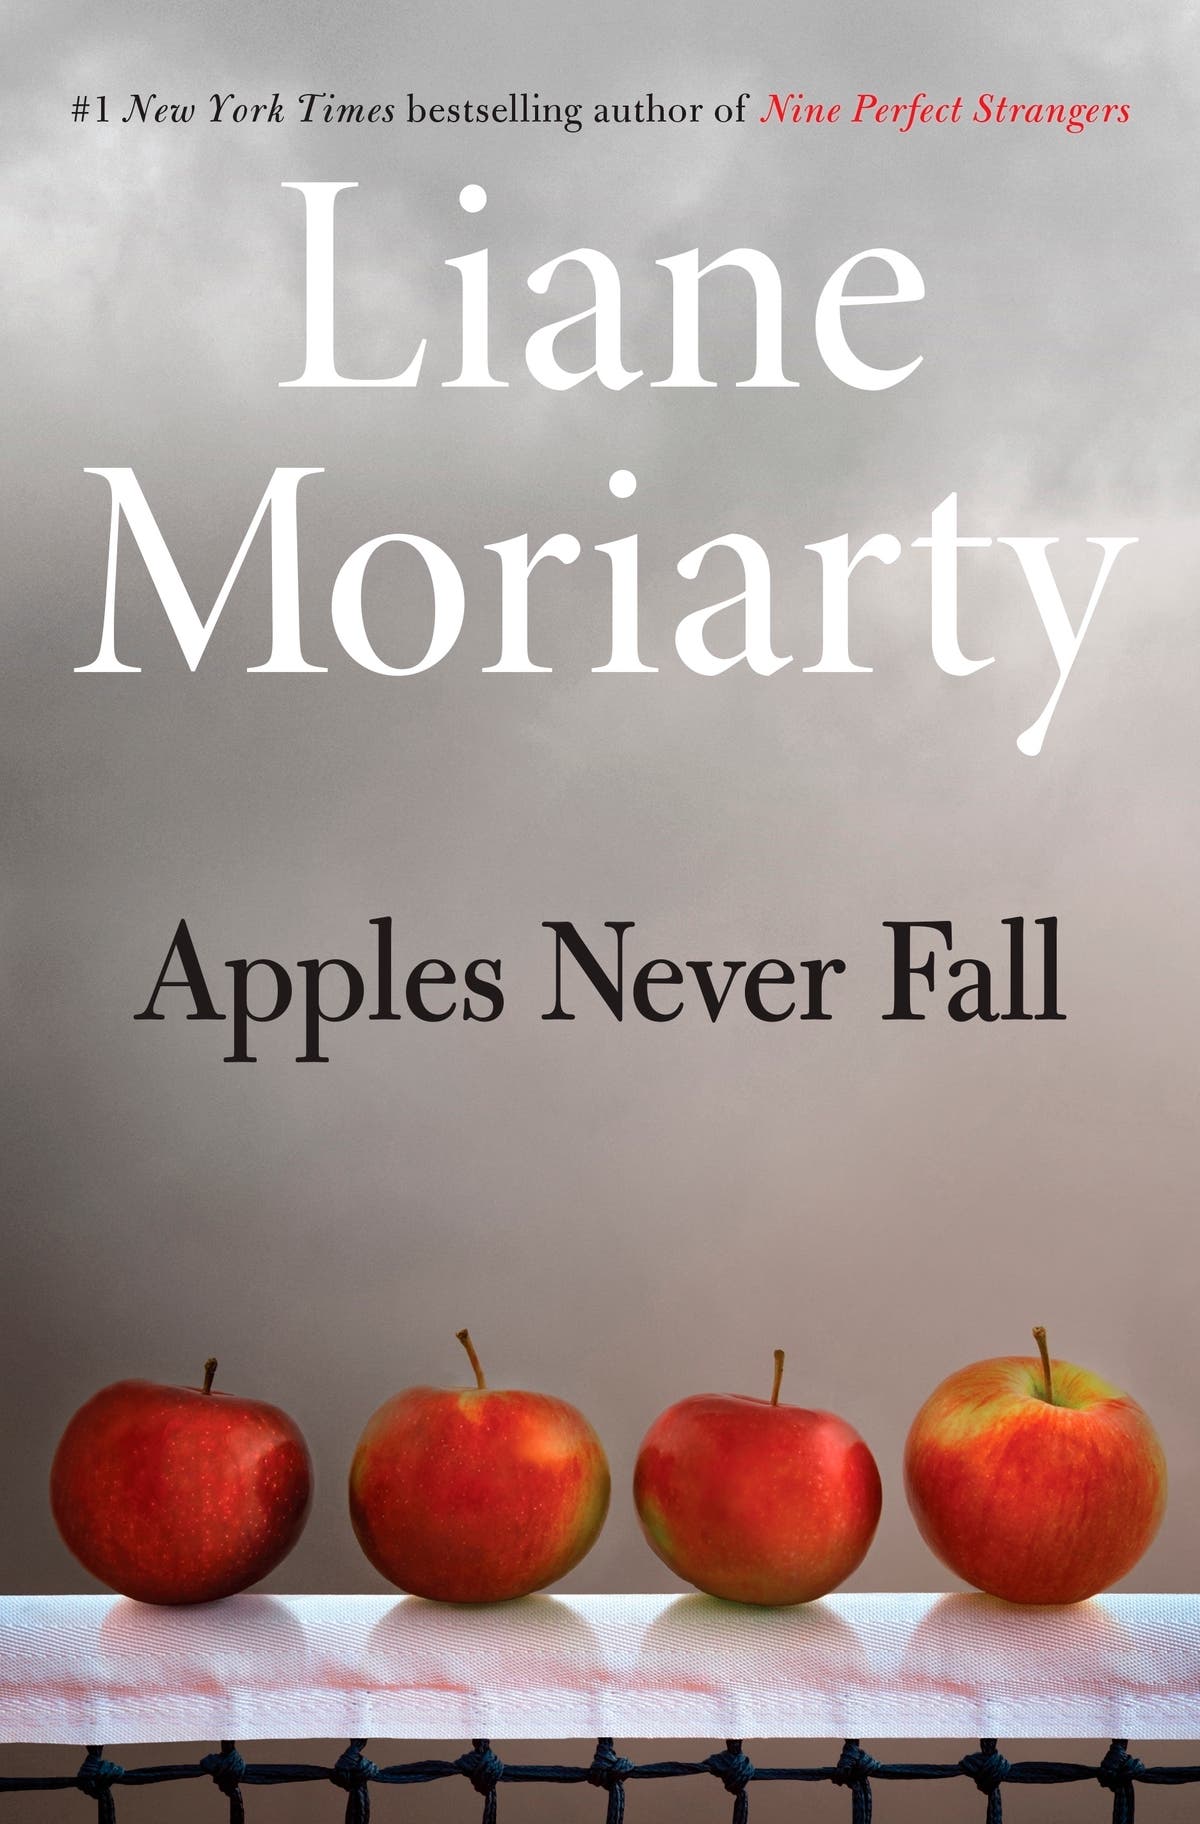 Resensie: Liane Moriarty hits an ace with 'Apples Never Fall'